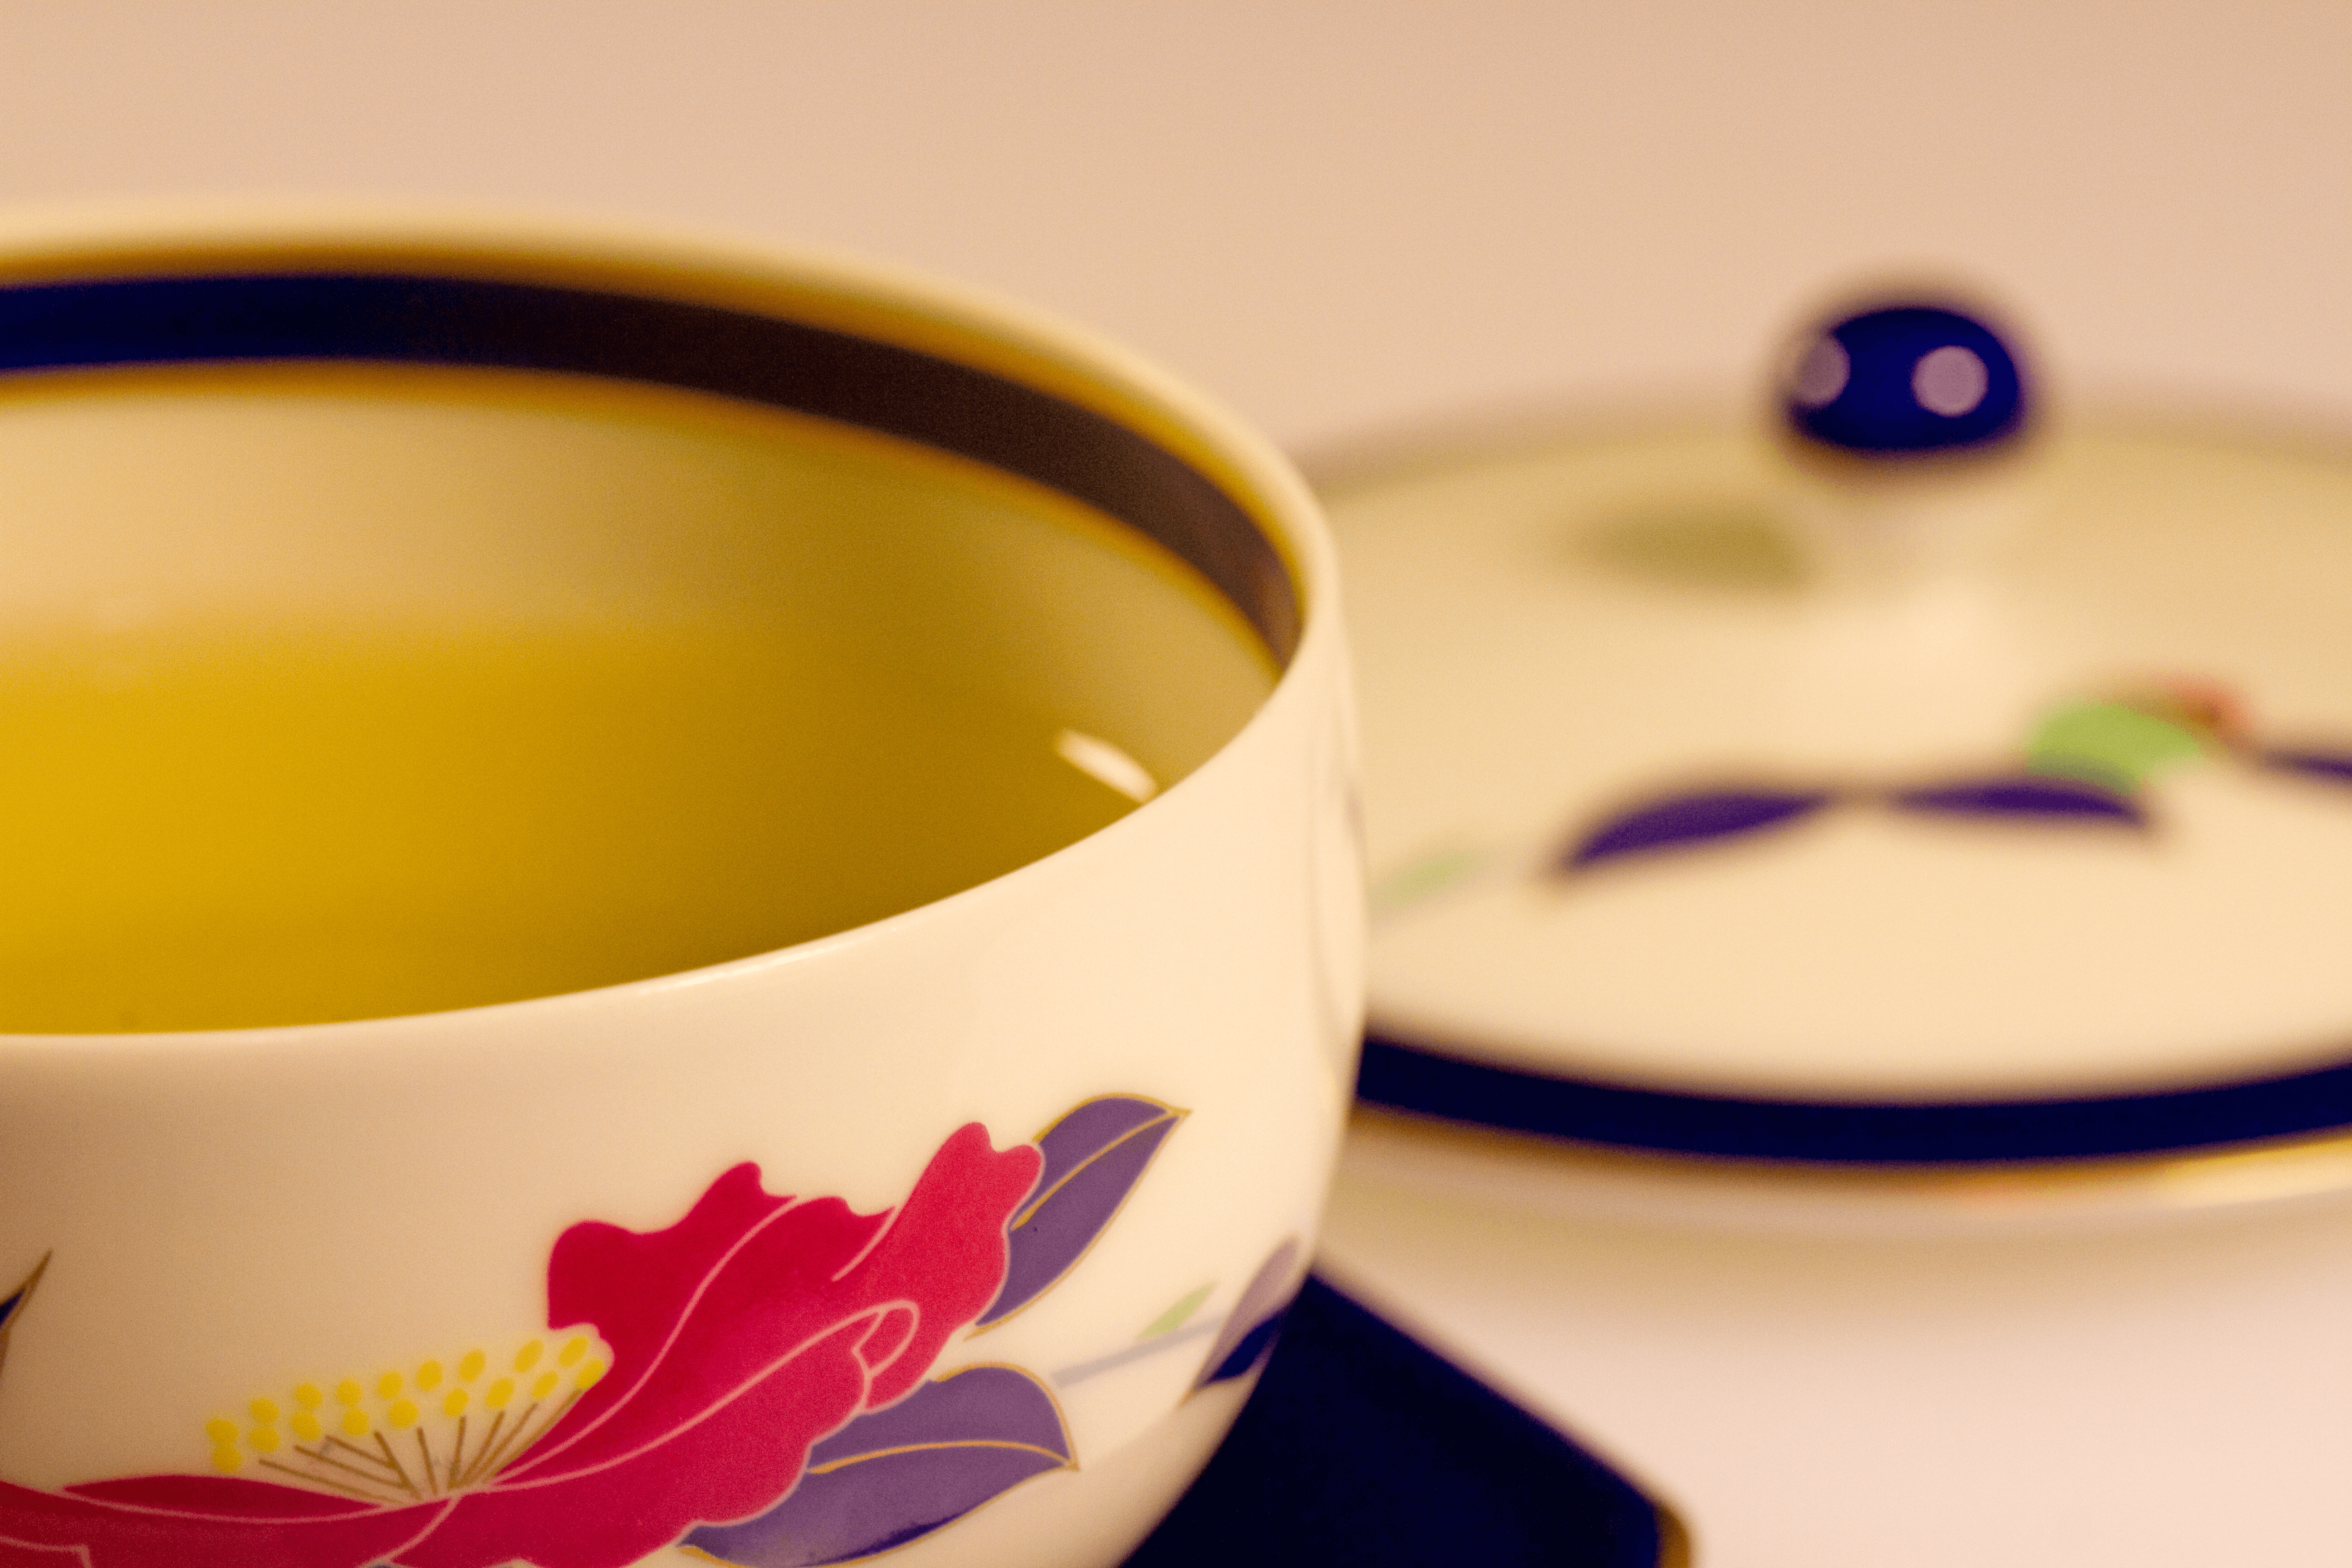 Green Tea’s Effects on Weight Loss